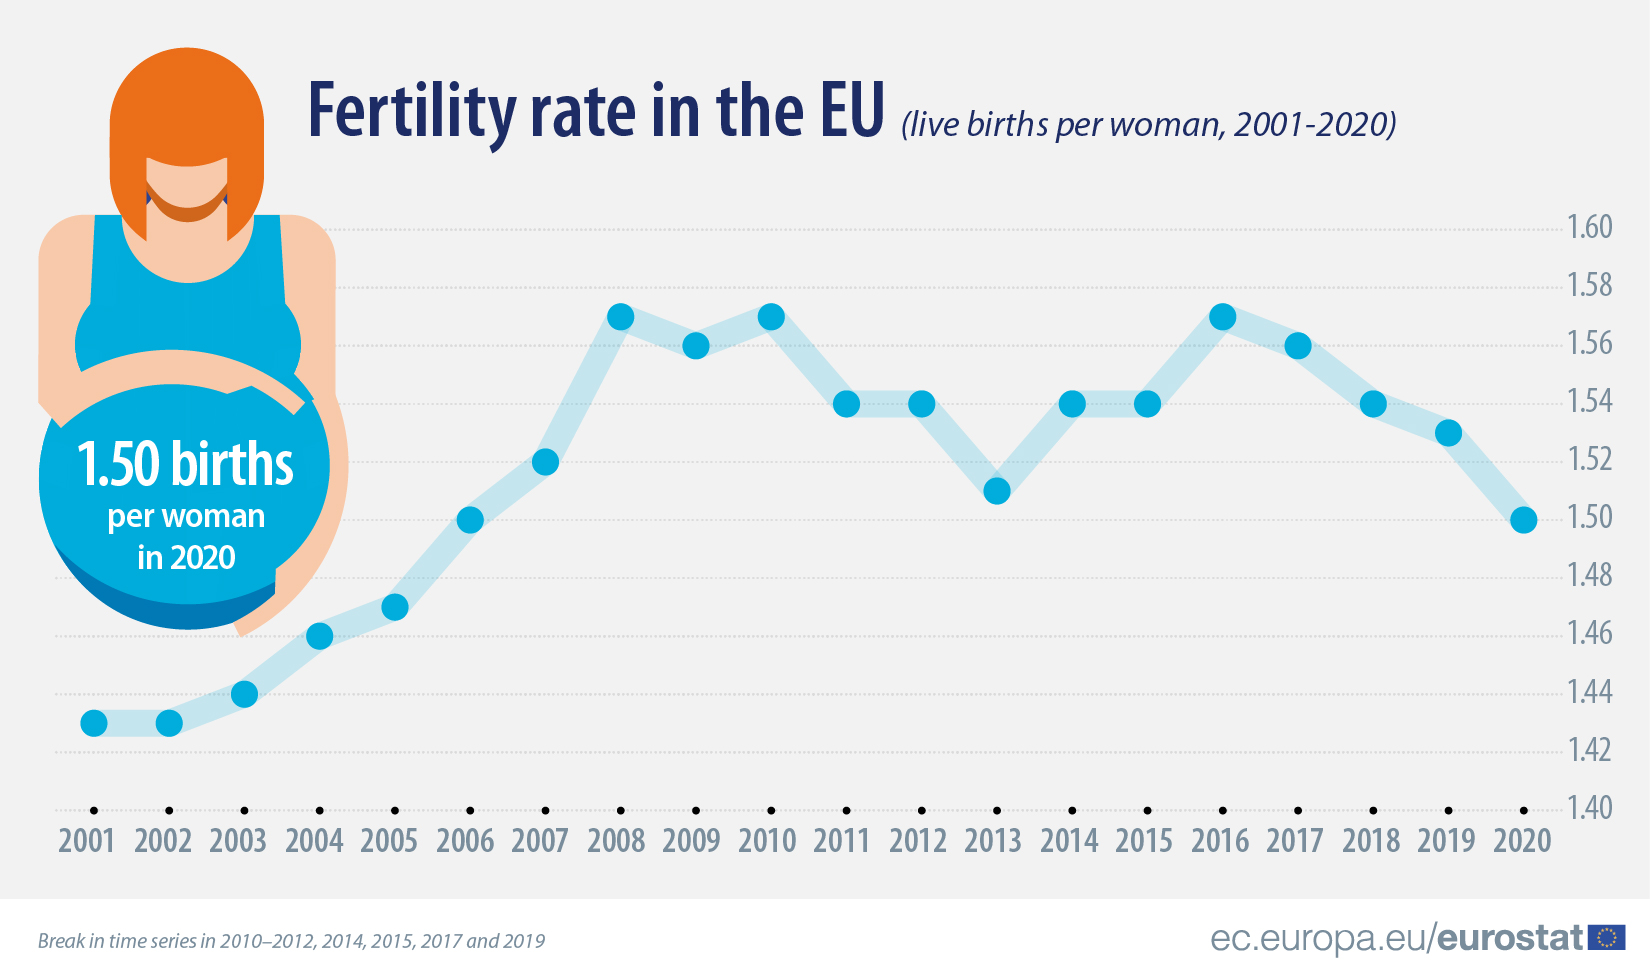 Line graph: Fertility rate in the EU, live births per woman from 2001 till 2020